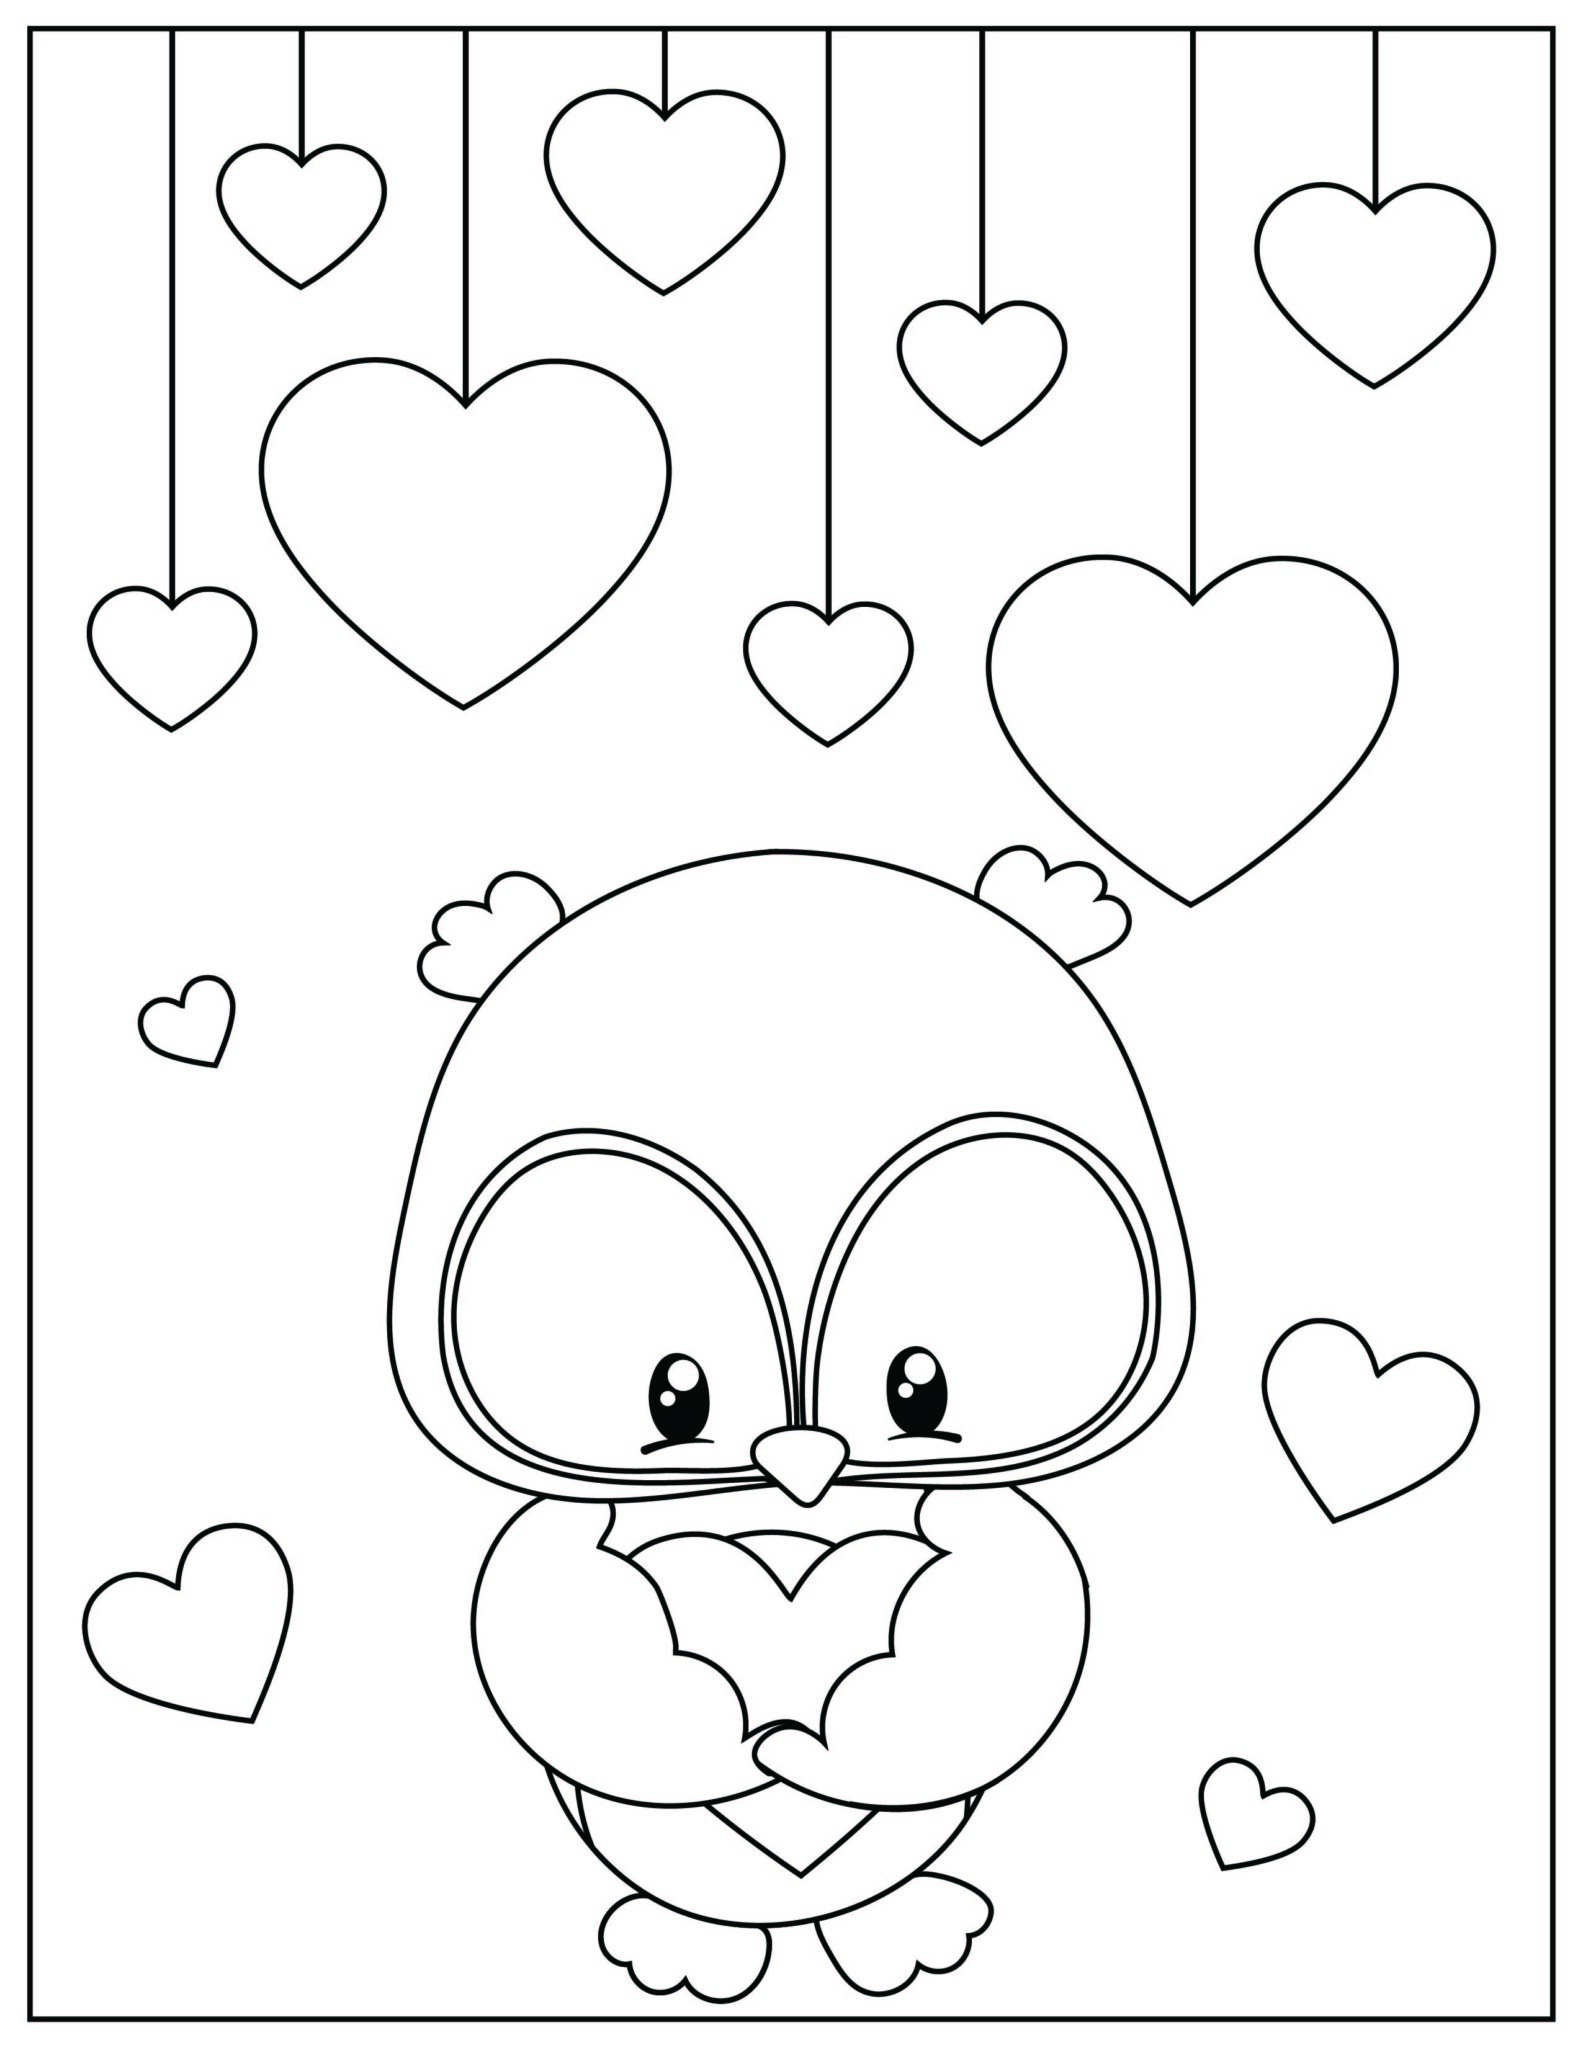 Cute Valentine's Coloring Pages